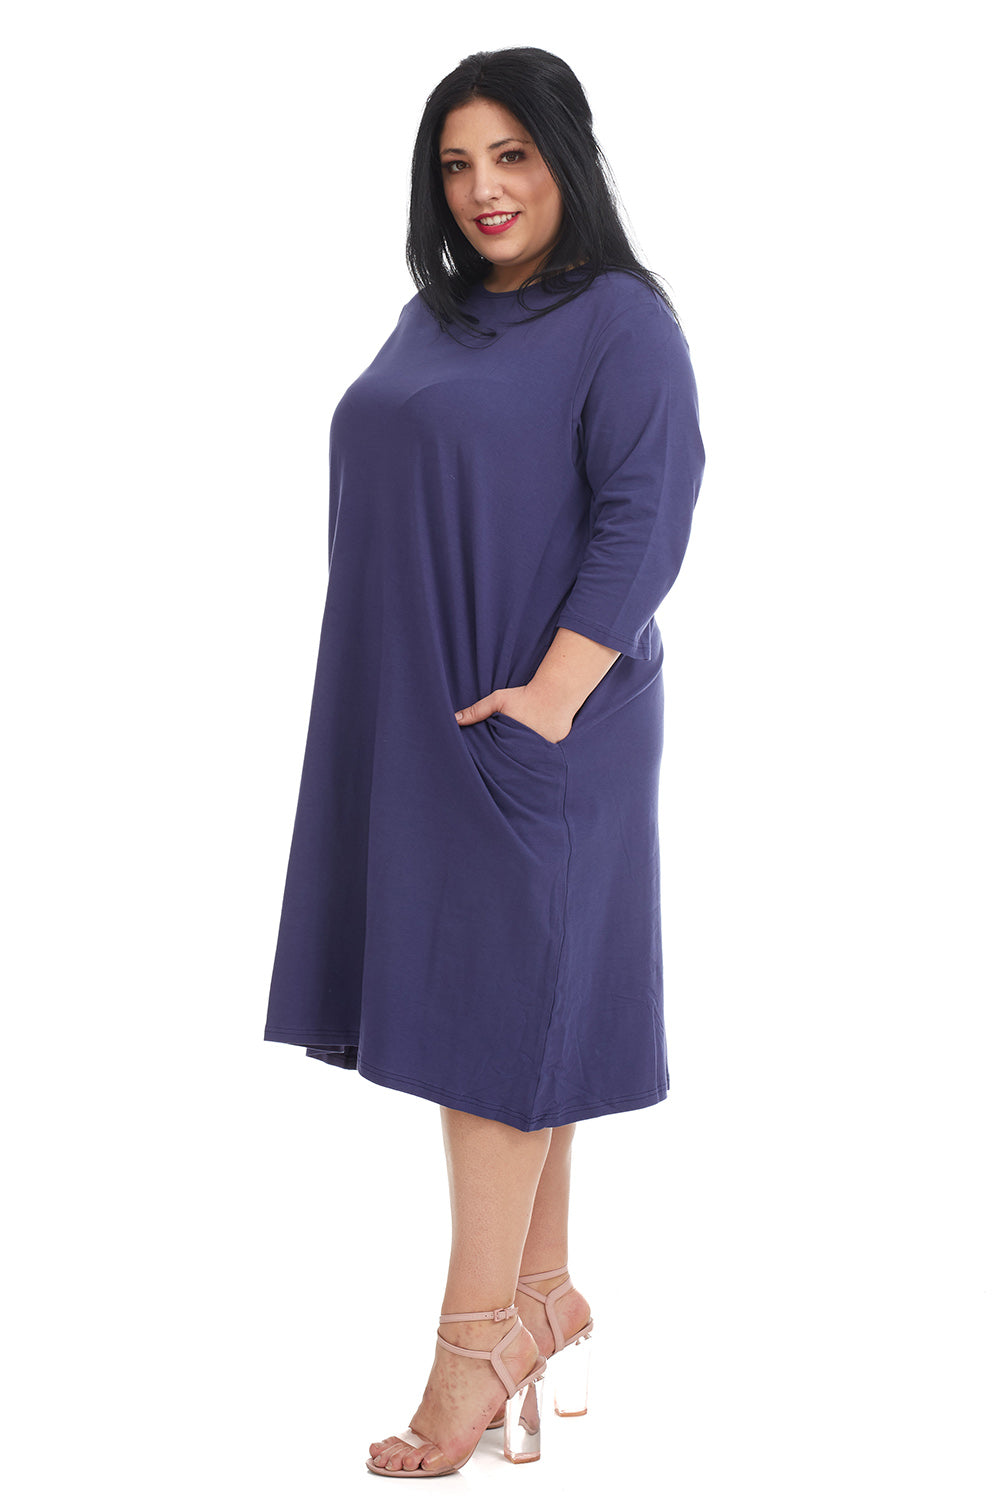 Soft and cozy cotton navy blue plus size t-shirt dress with pockets. modest 3/4 sleeves and knee length